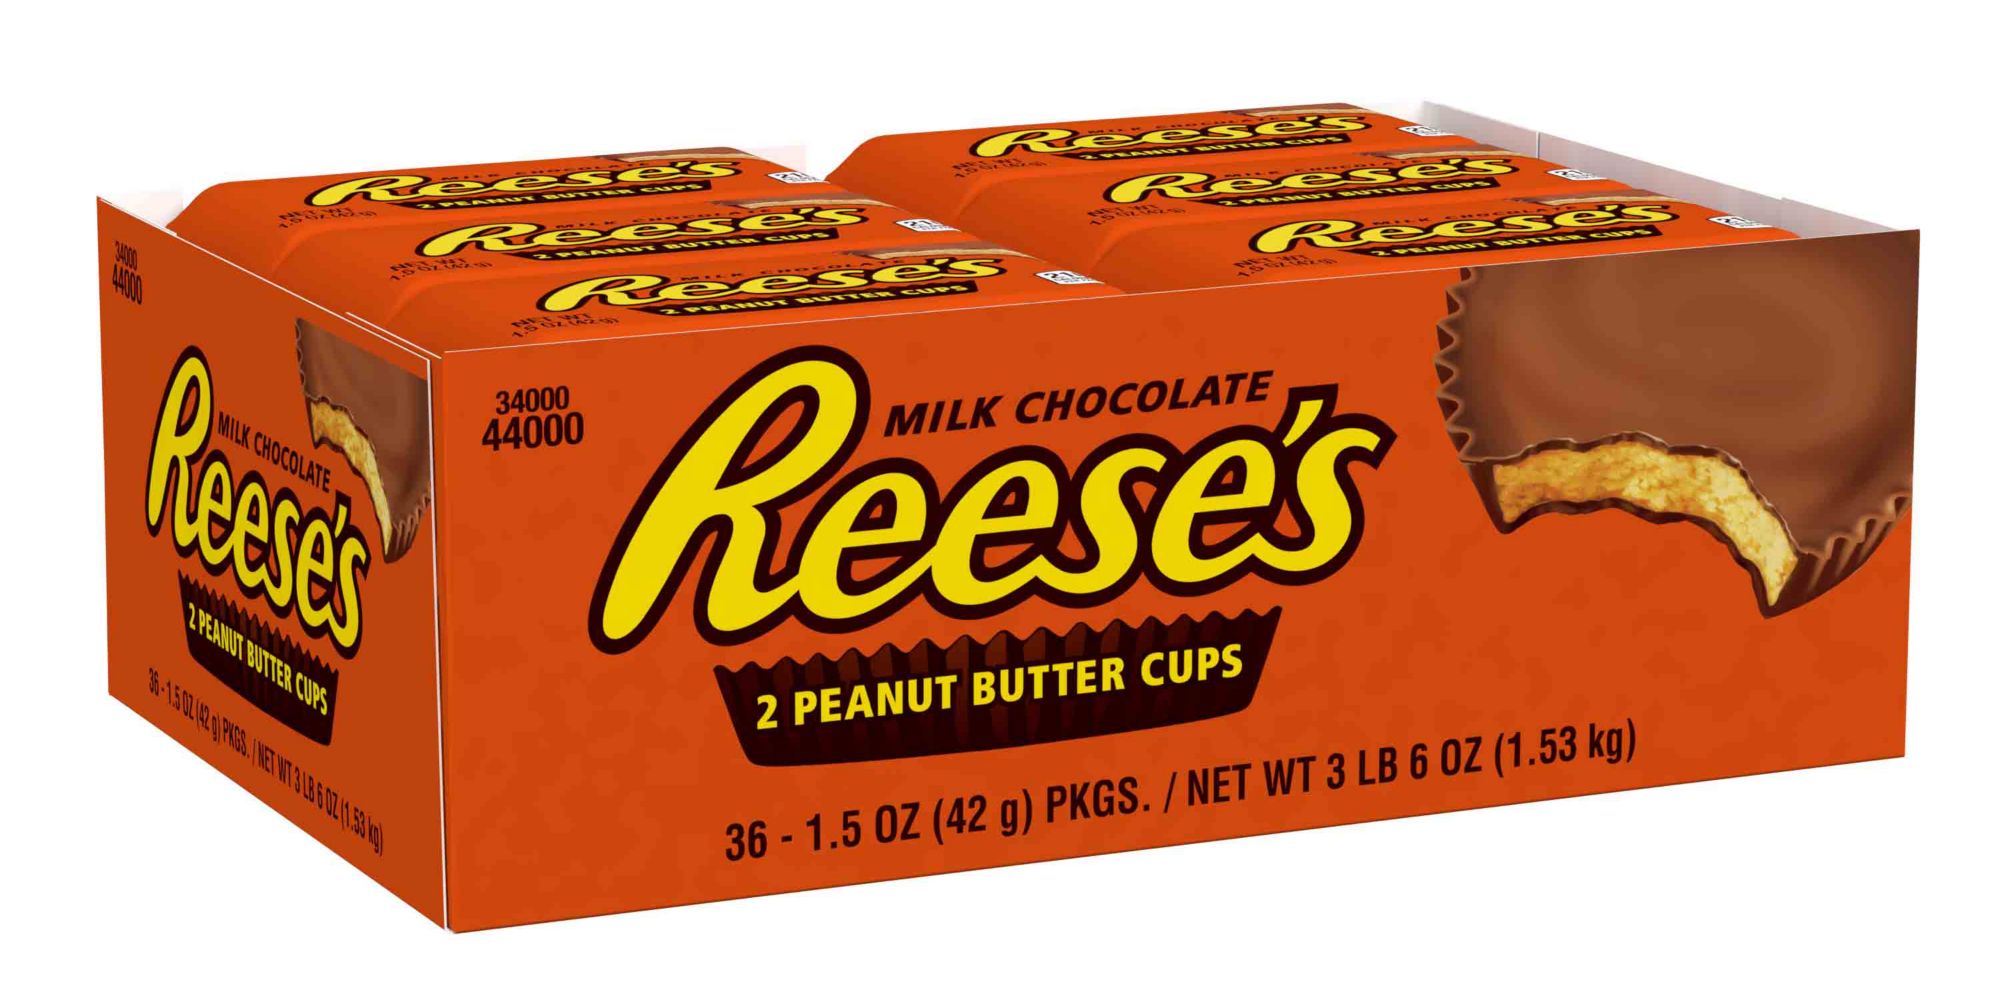 Reese's Full Size Milk Chocolate Peanut Butter Cups, 36 pk./1.5 oz.